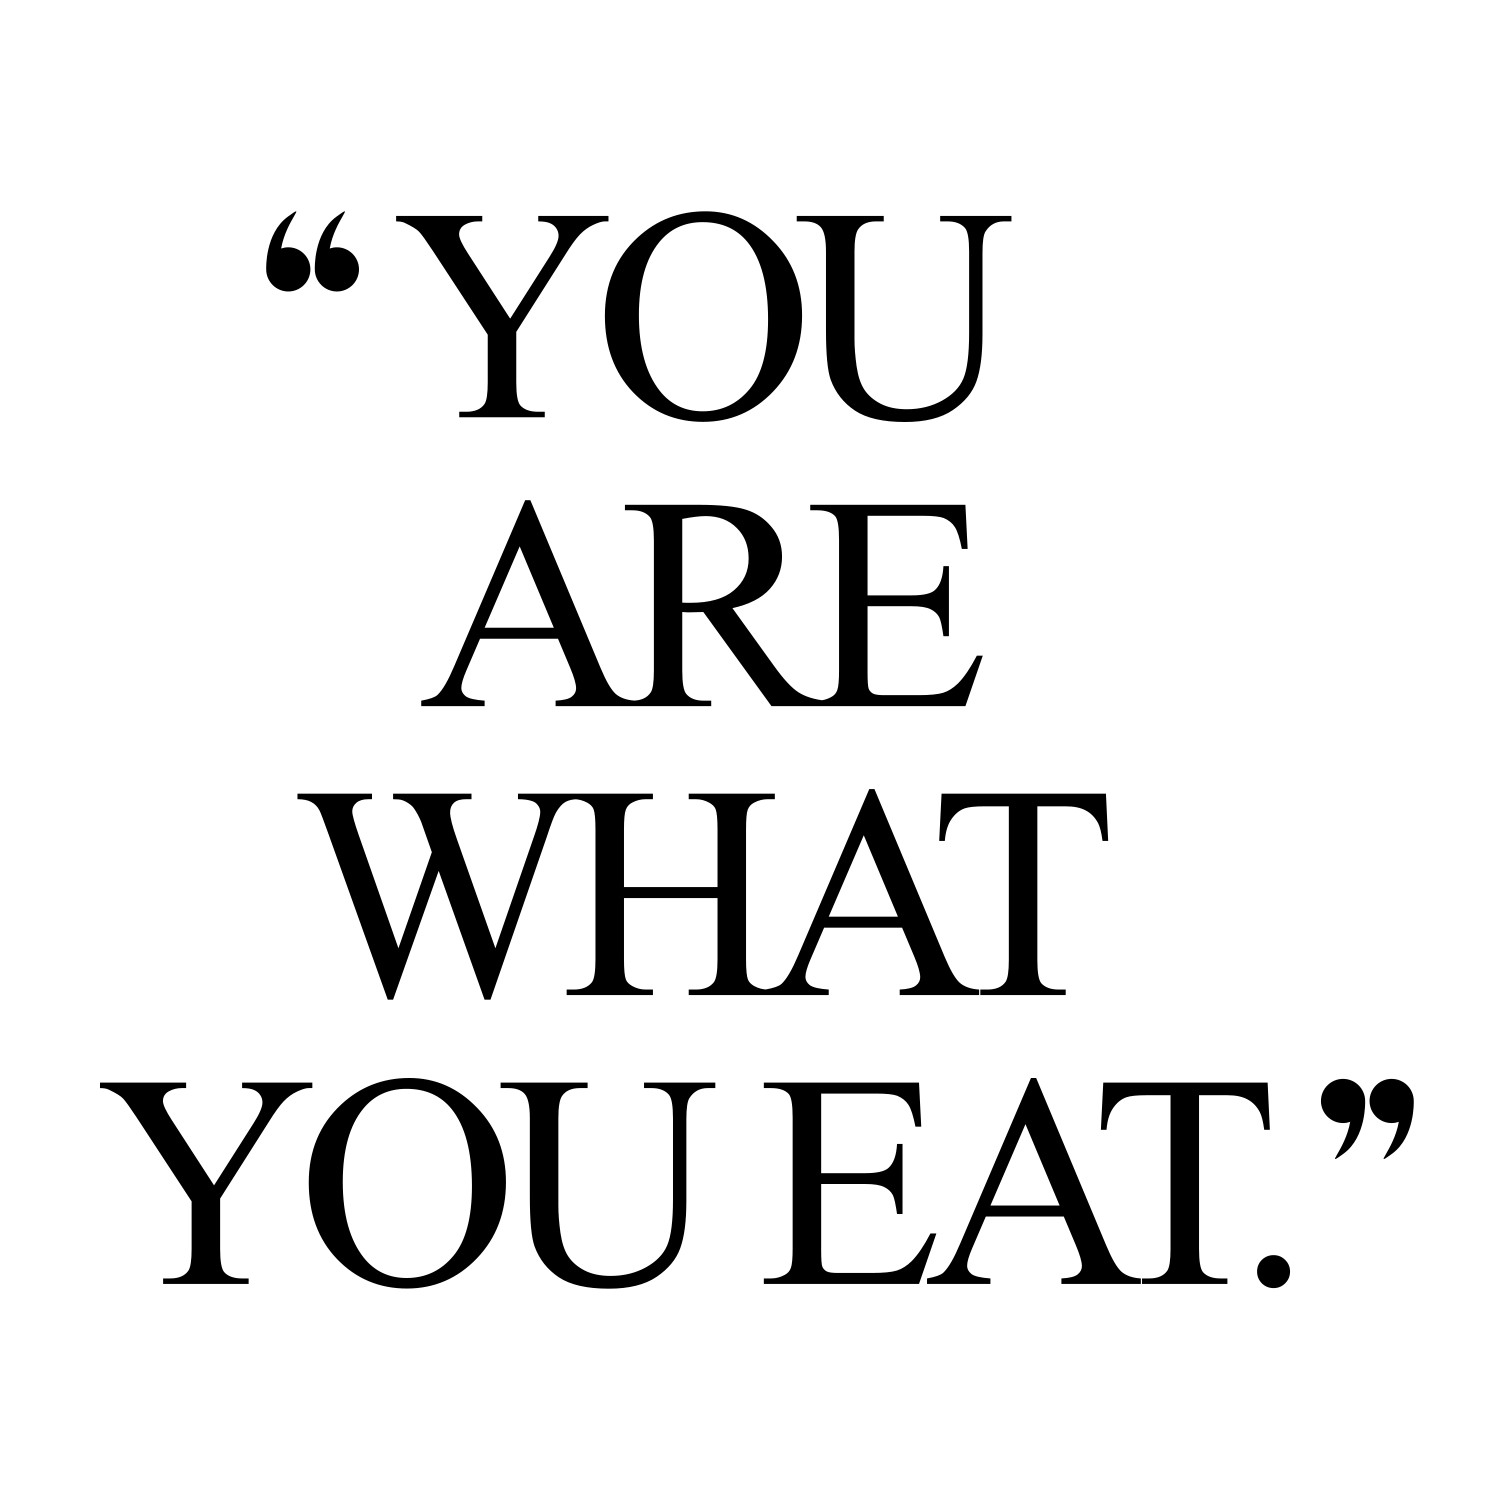 Eat healthy be healthy! Browse our collection of motivational health and fitness quotes and get instant training inspiration. Transform positive thoughts into positive actions and get fit, healthy and happy! https://www.spotebi.com/workout-motivation/eat-healthy-be-healthy-motivational-health-and-fitness-quote/